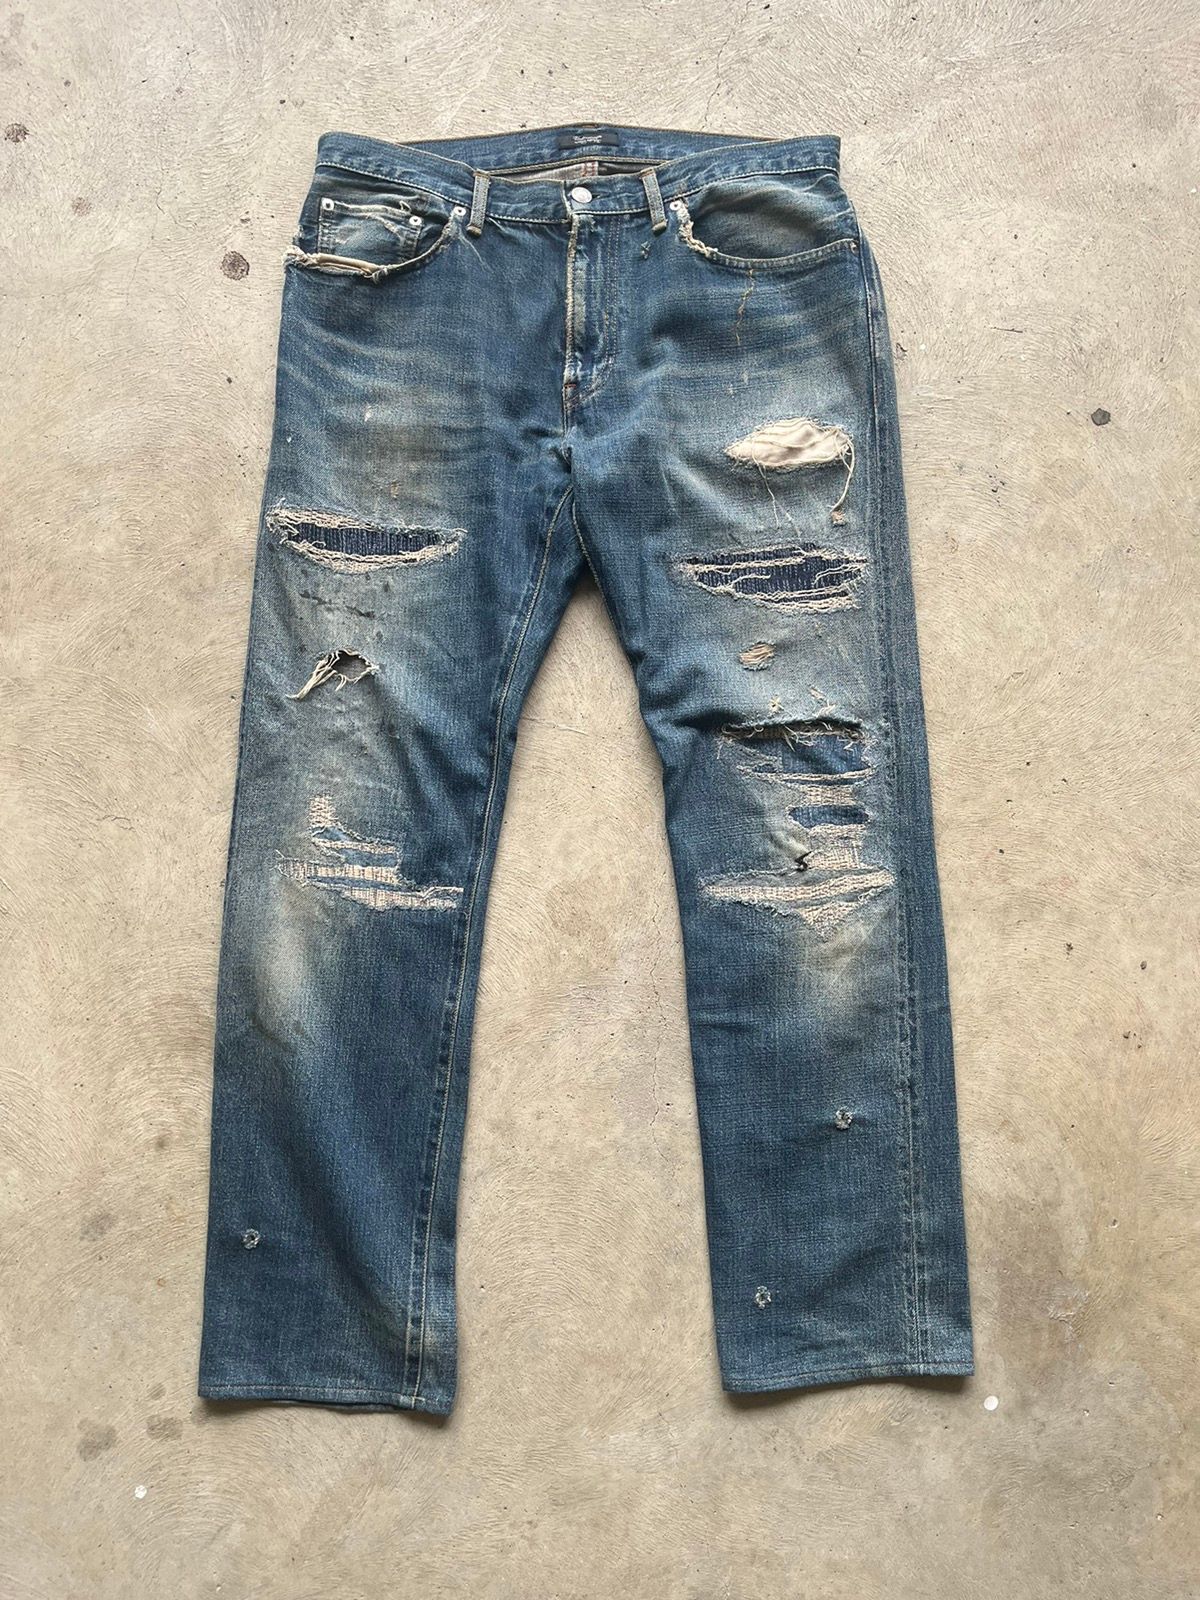 Pre-owned Undercover Aw12 Psychocolor Crash Repaired Denim Jeans | 4